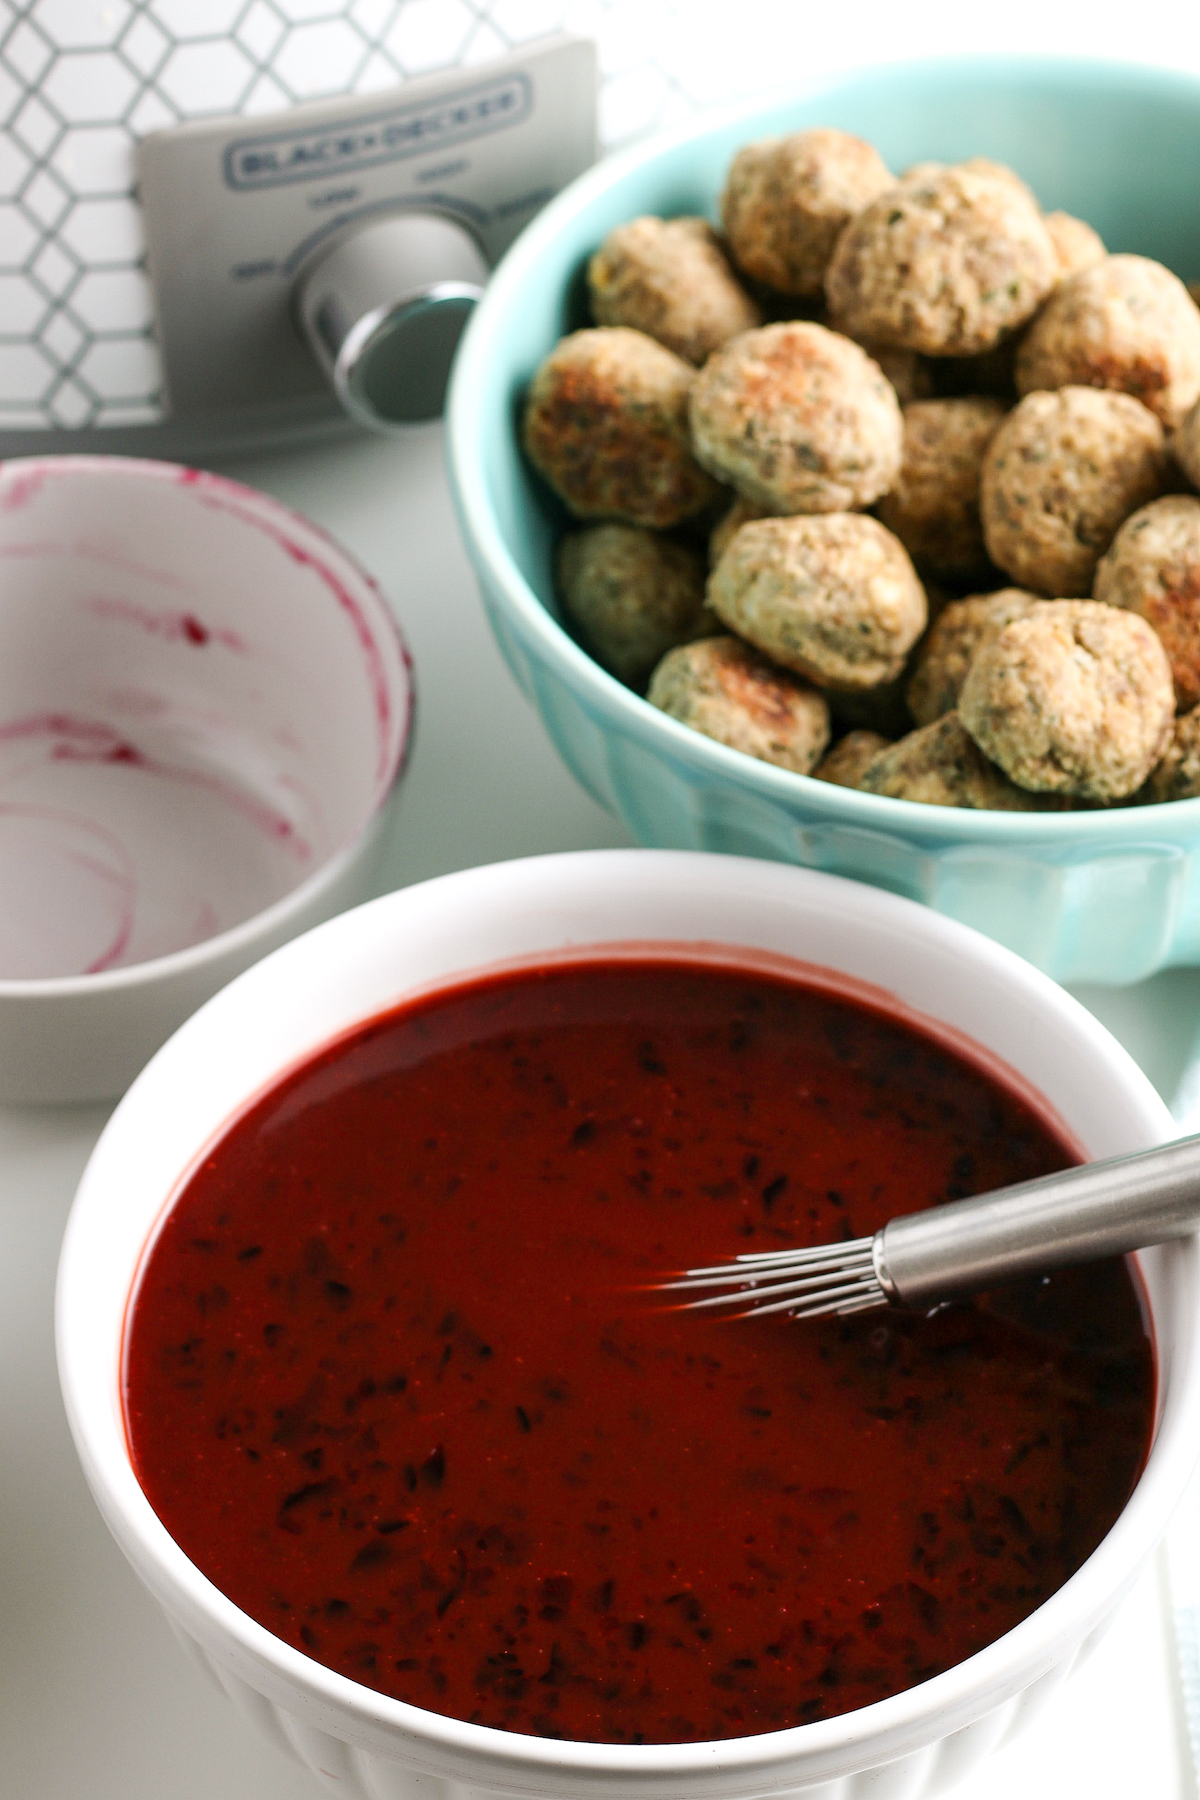 Whisked jelly and barbecue in a white mixing bowl. A dish of meatballs and a slow cooker are nearby on the work surface.